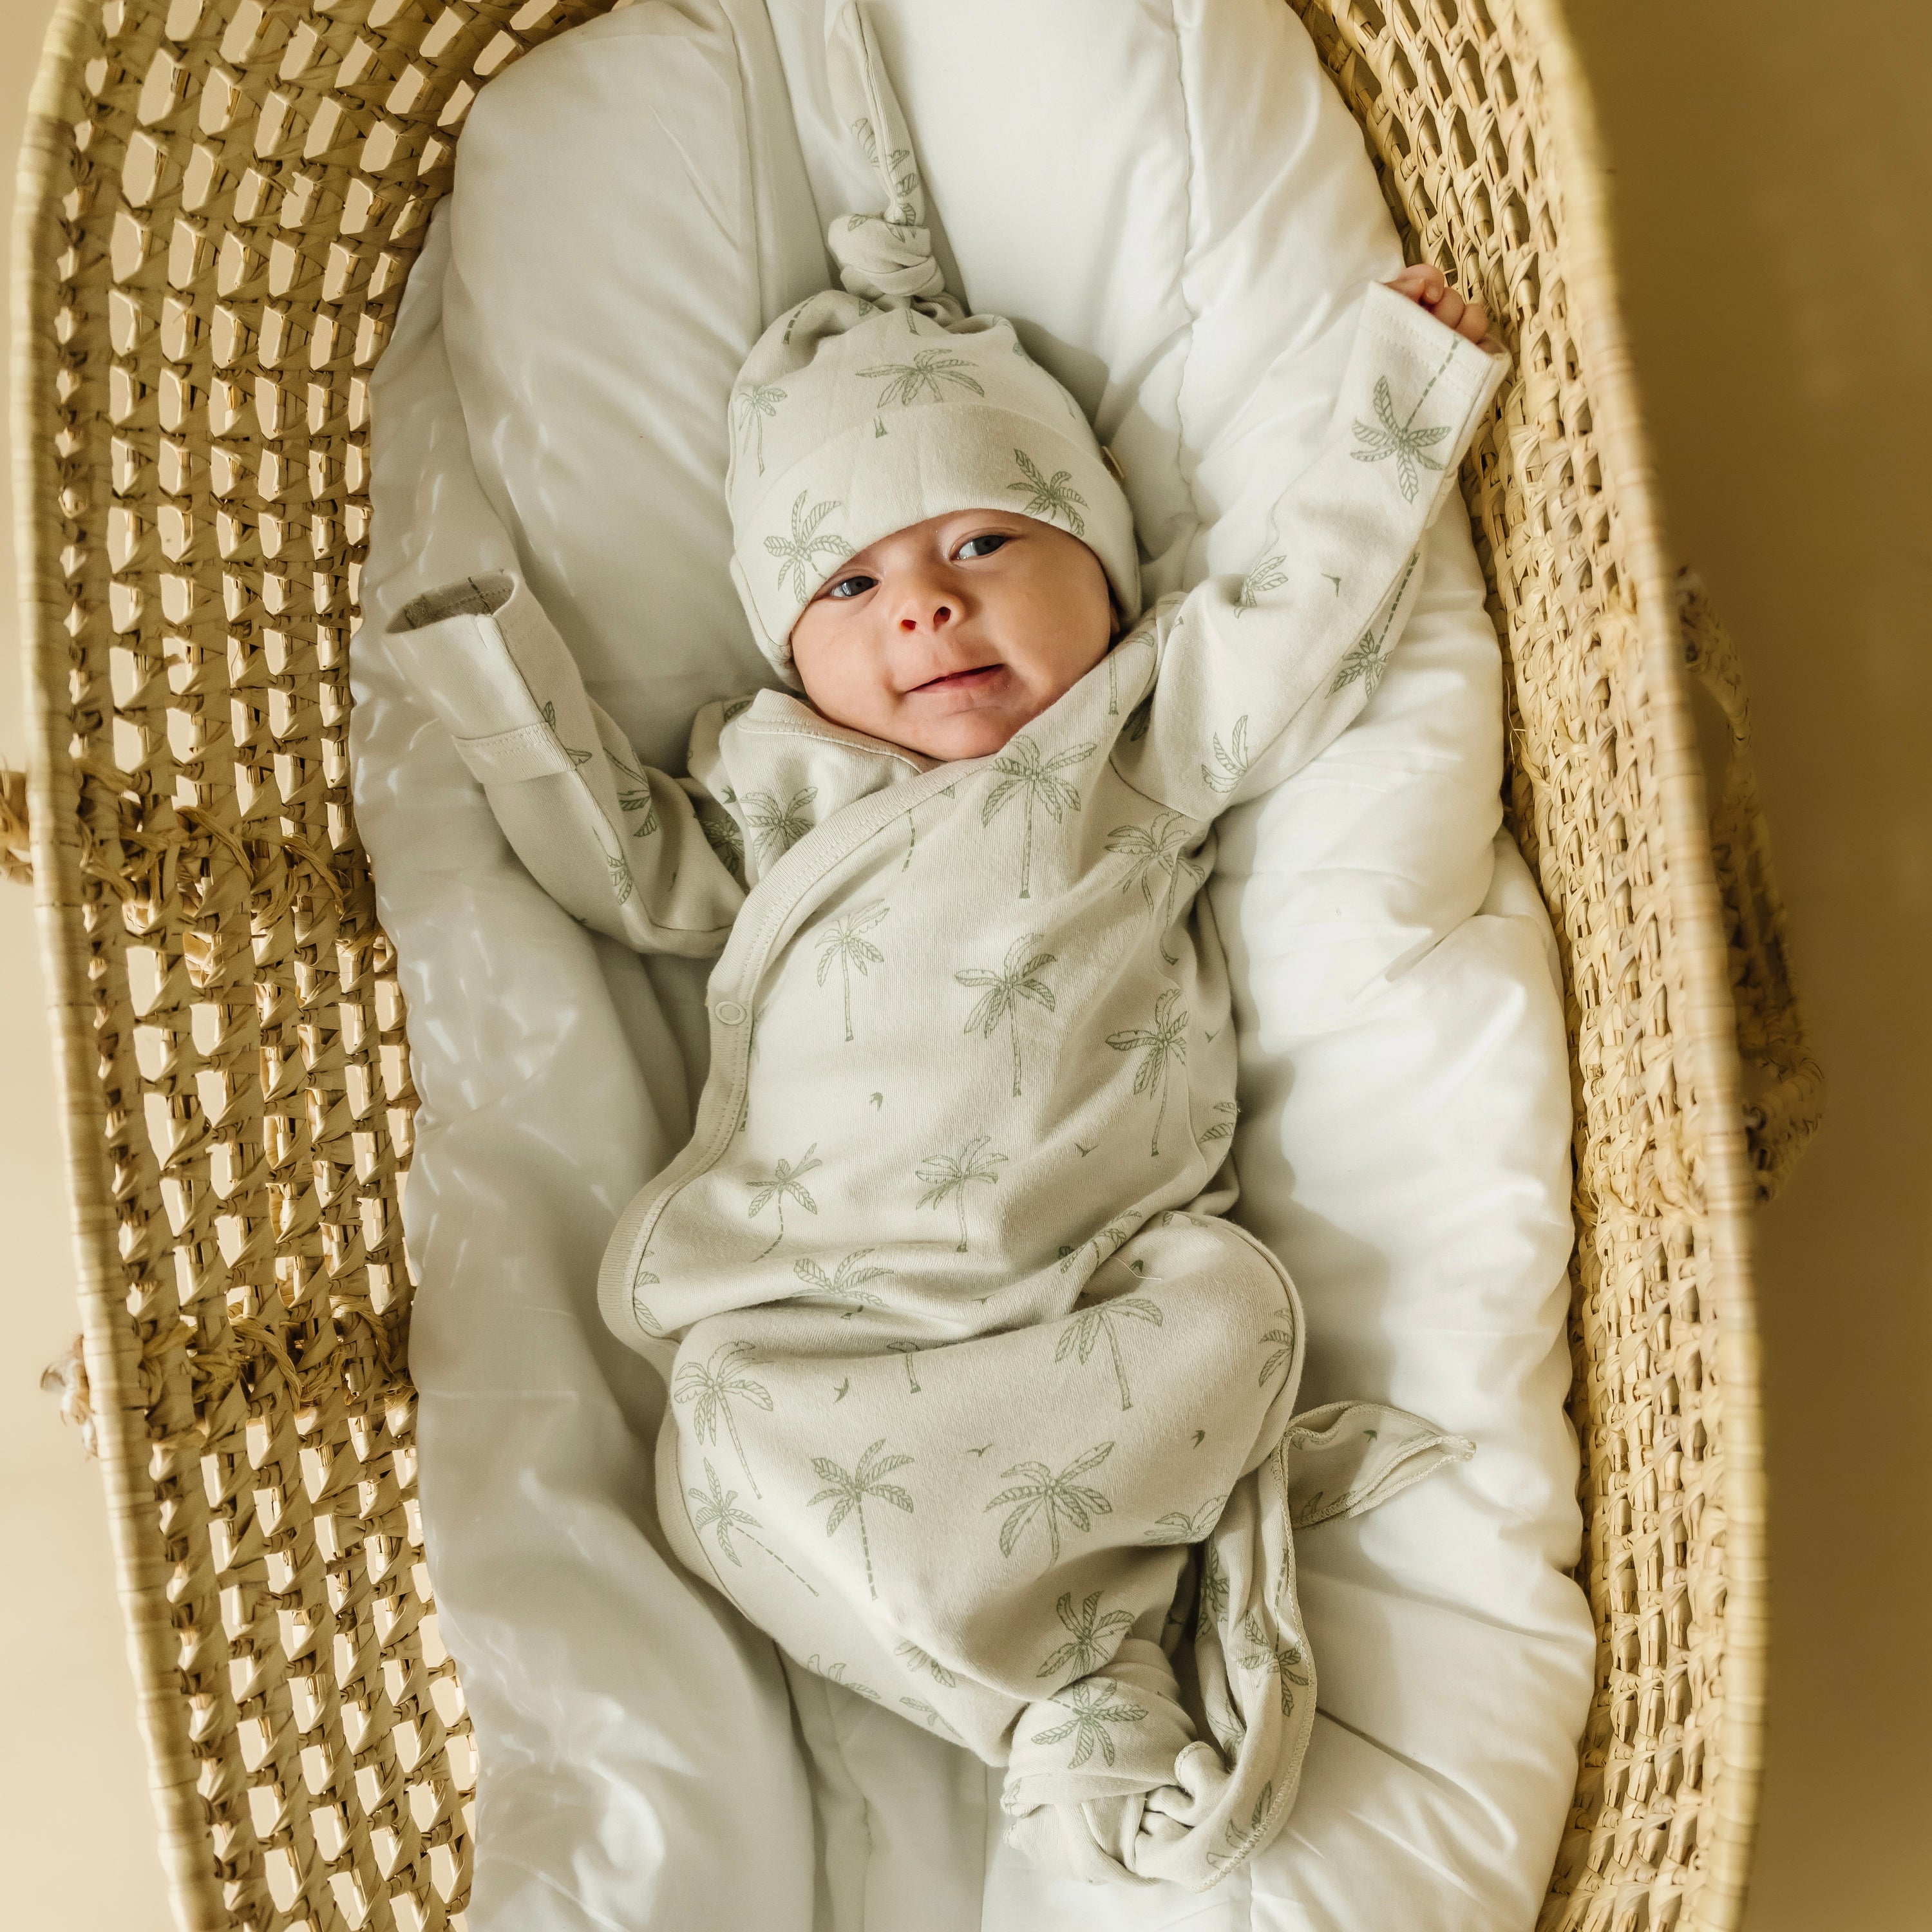 Hand-Woven Moses Basket - Fair Trade Baby Products - Eco Girl Shop